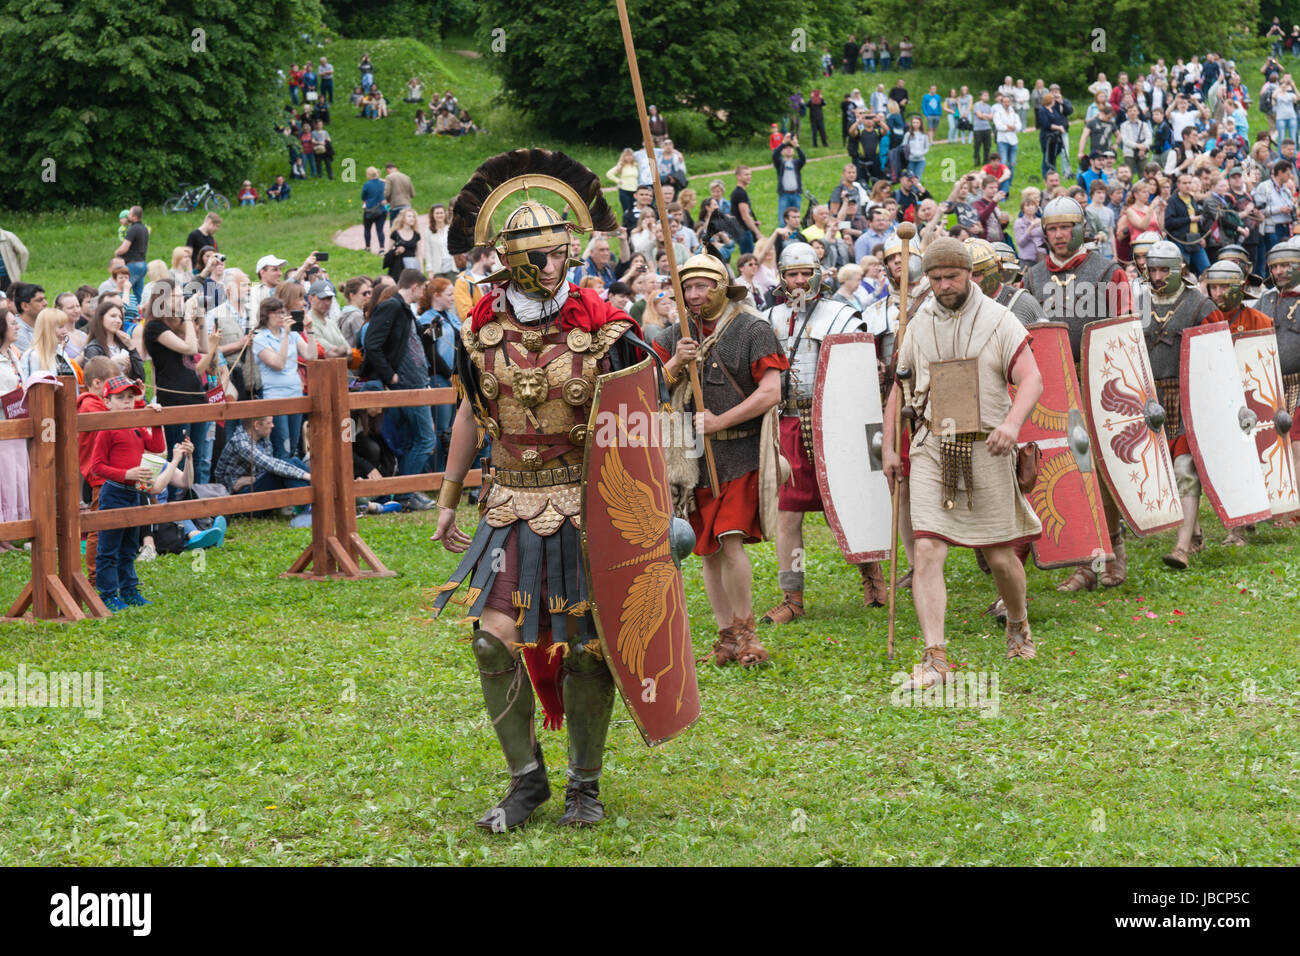 Moscow, Russia. 10th June, 2017. International Times & Epochs history reenactment festival in under way in Moscow. About 6000 reenactors from around the world take part in this 12 day long festival. They represent many history periods from times of ancient Greece and Rome to XX century on more than 15 festival areas all over the city. Ancient Rome period everyday life scenes, gladiator games and other events are presented in Kolomenskoe public park. Publius Quinctilius Varus legions on the last march to Teutoburg forest. Credit: Alex's Pictures/Alamy Live News Stock Photo